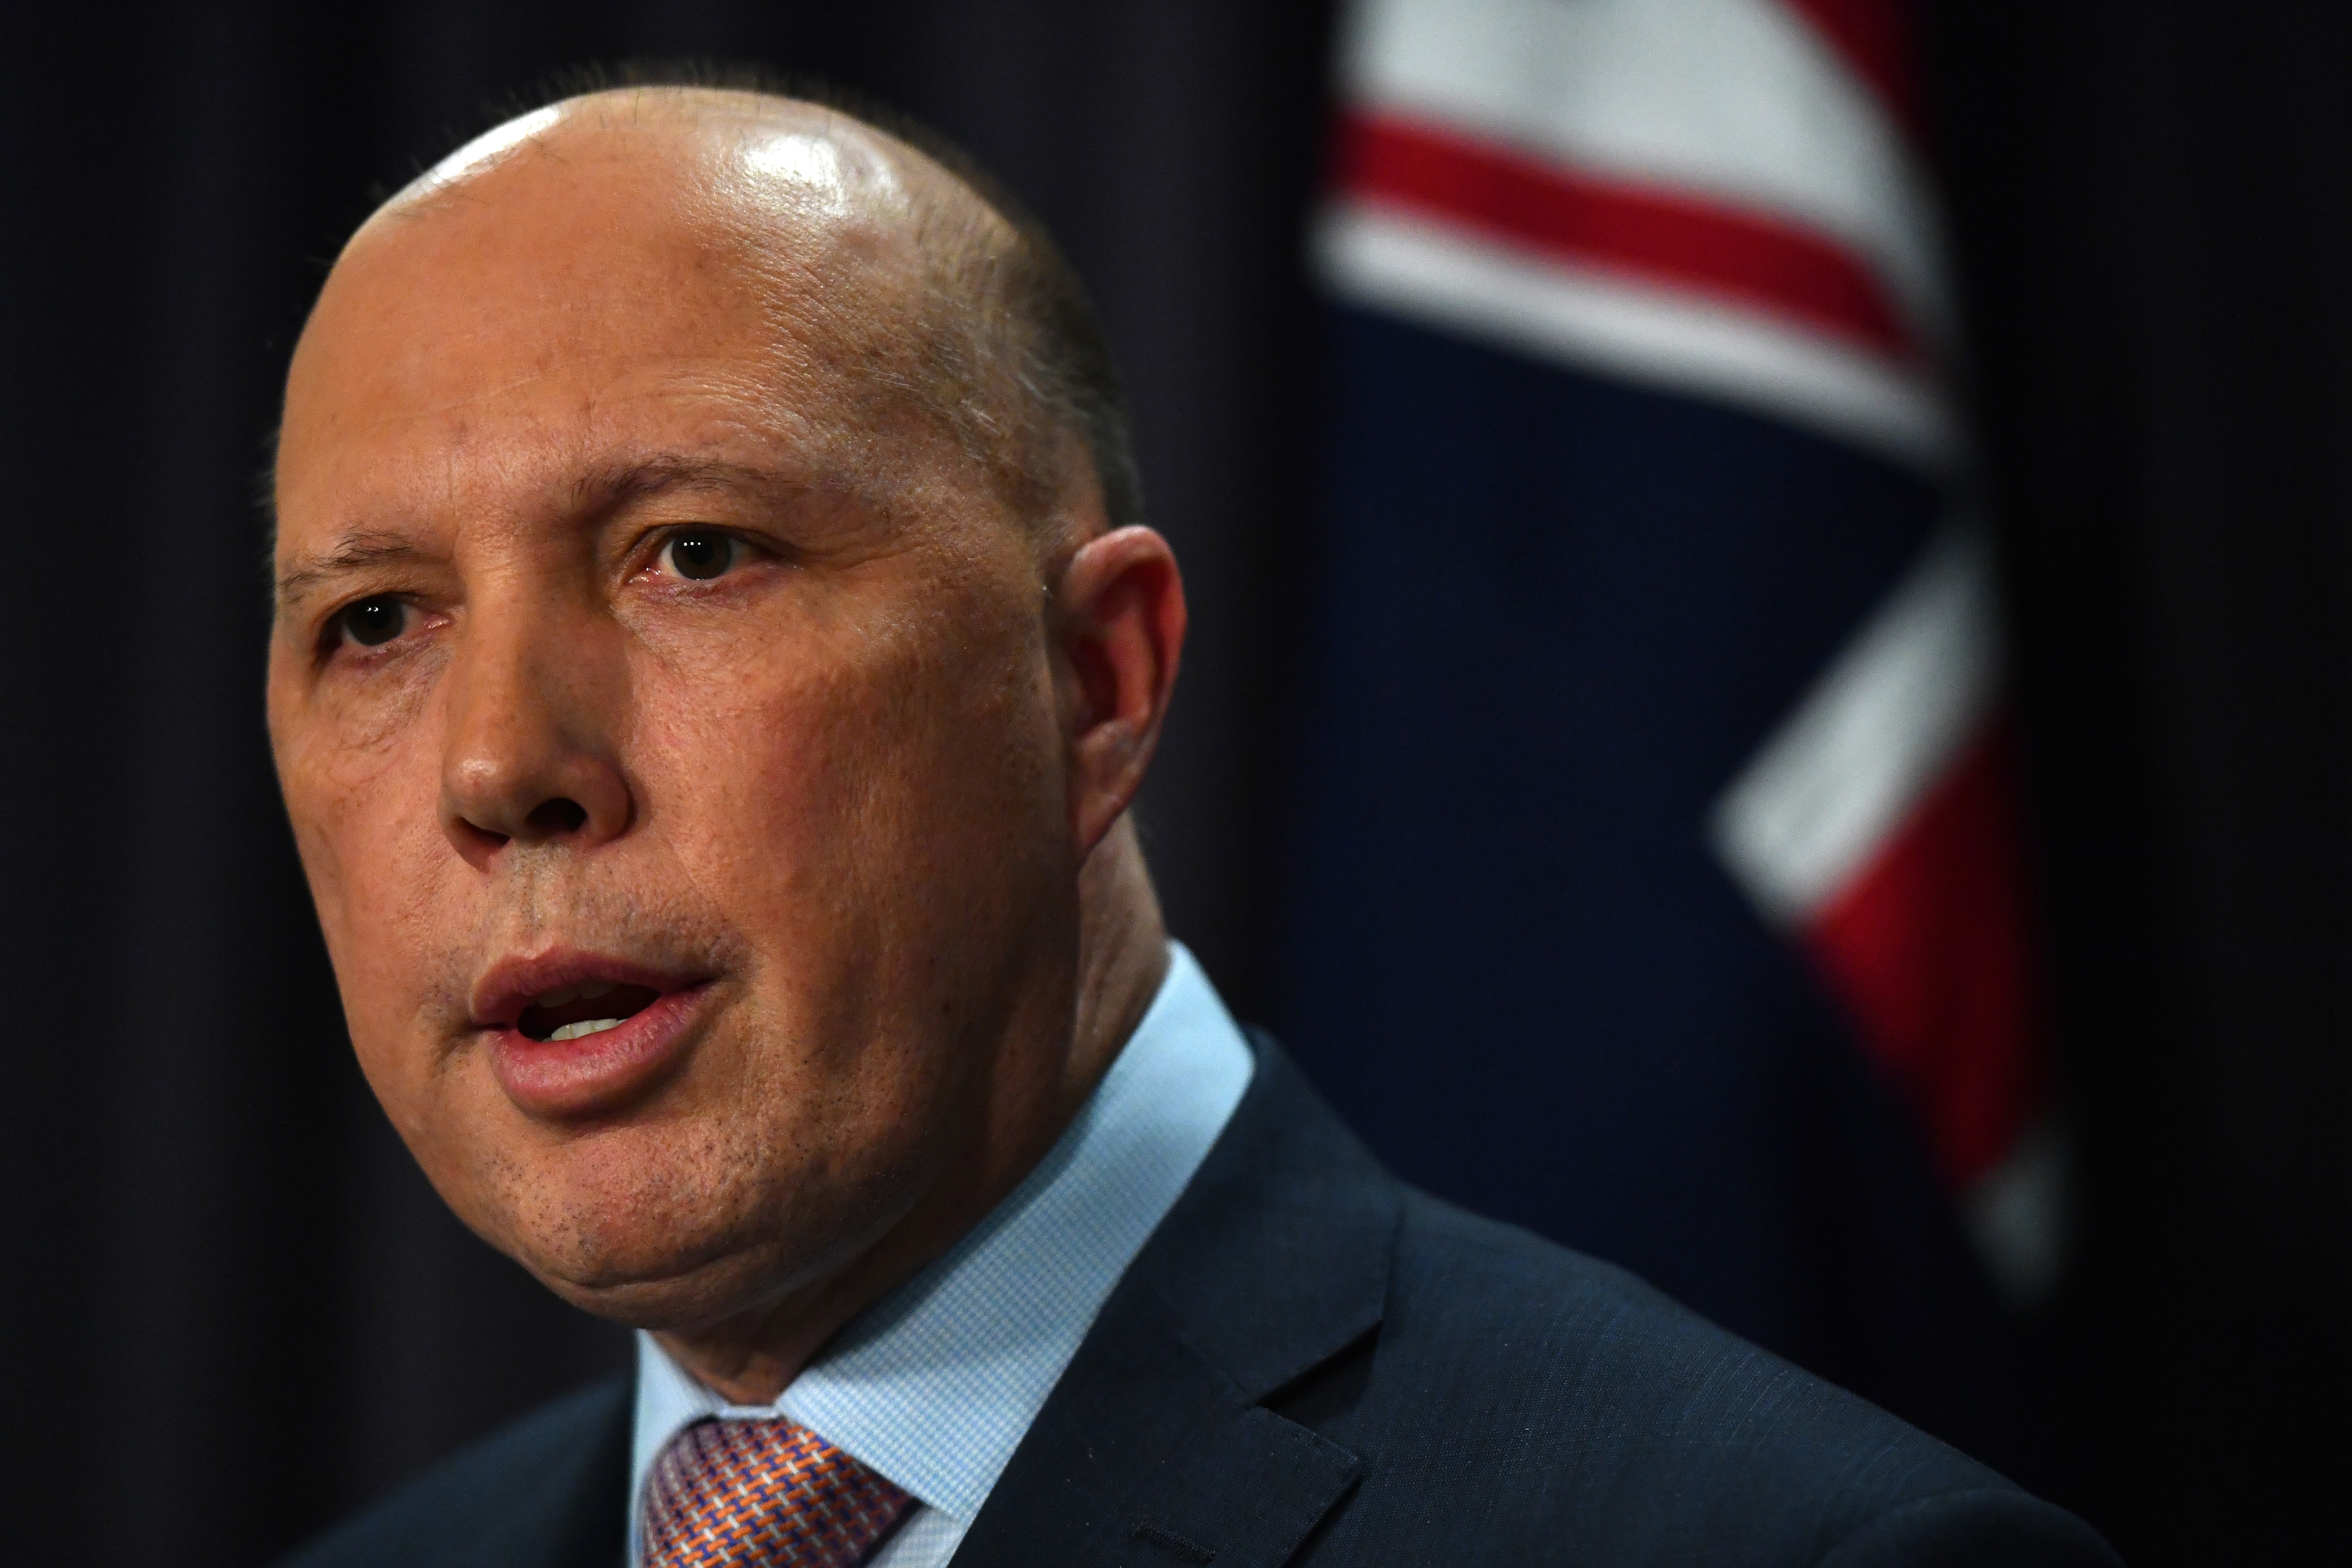 Home Affairs Minister Peter Dutton has called for tougher penalties. 